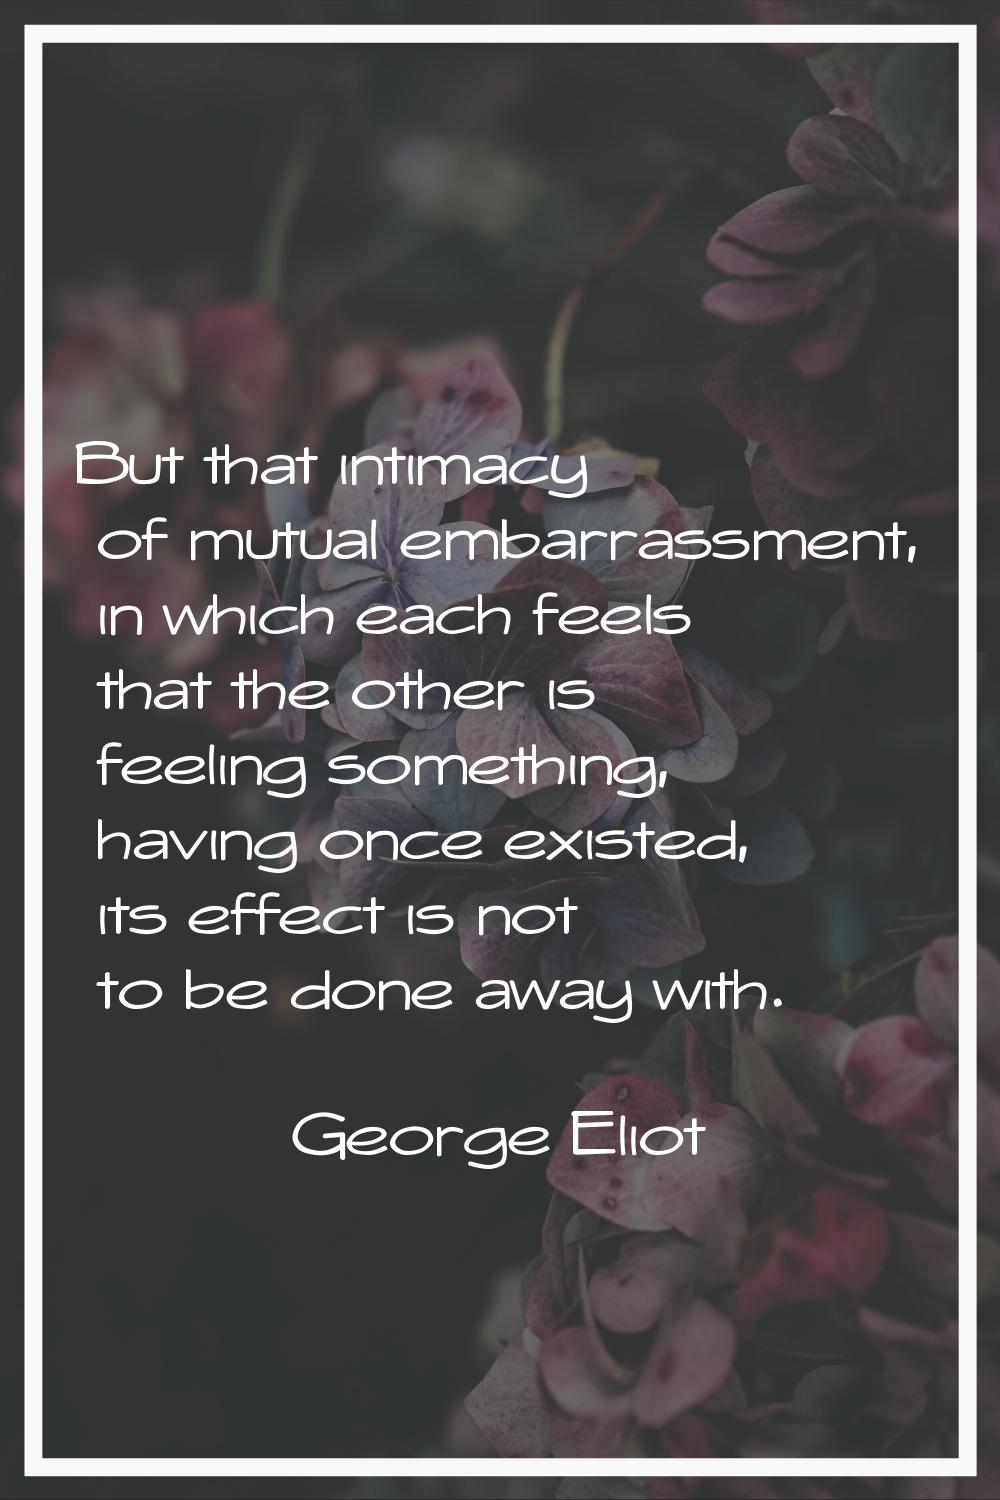 But that intimacy of mutual embarrassment, in which each feels that the other is feeling something,